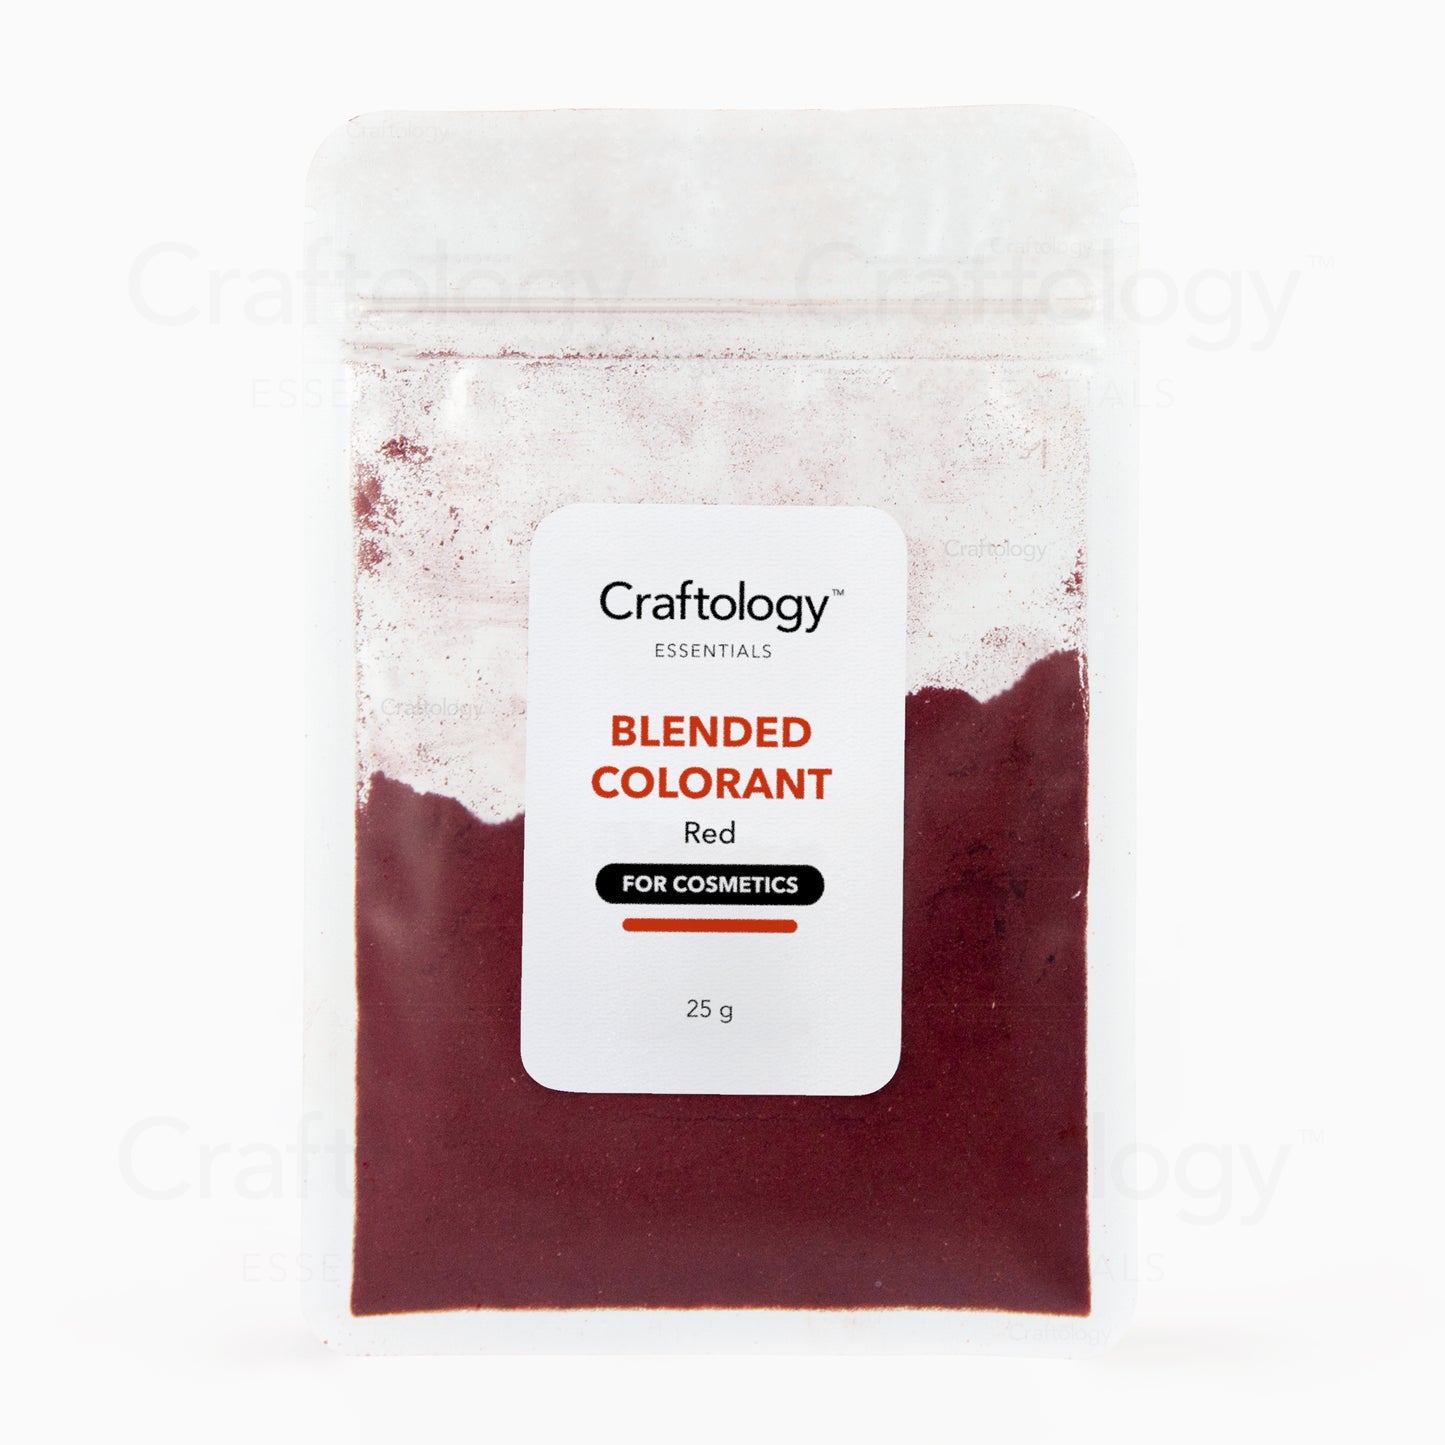 Blended Colorant - Red - Craftology Essentials - Philippines